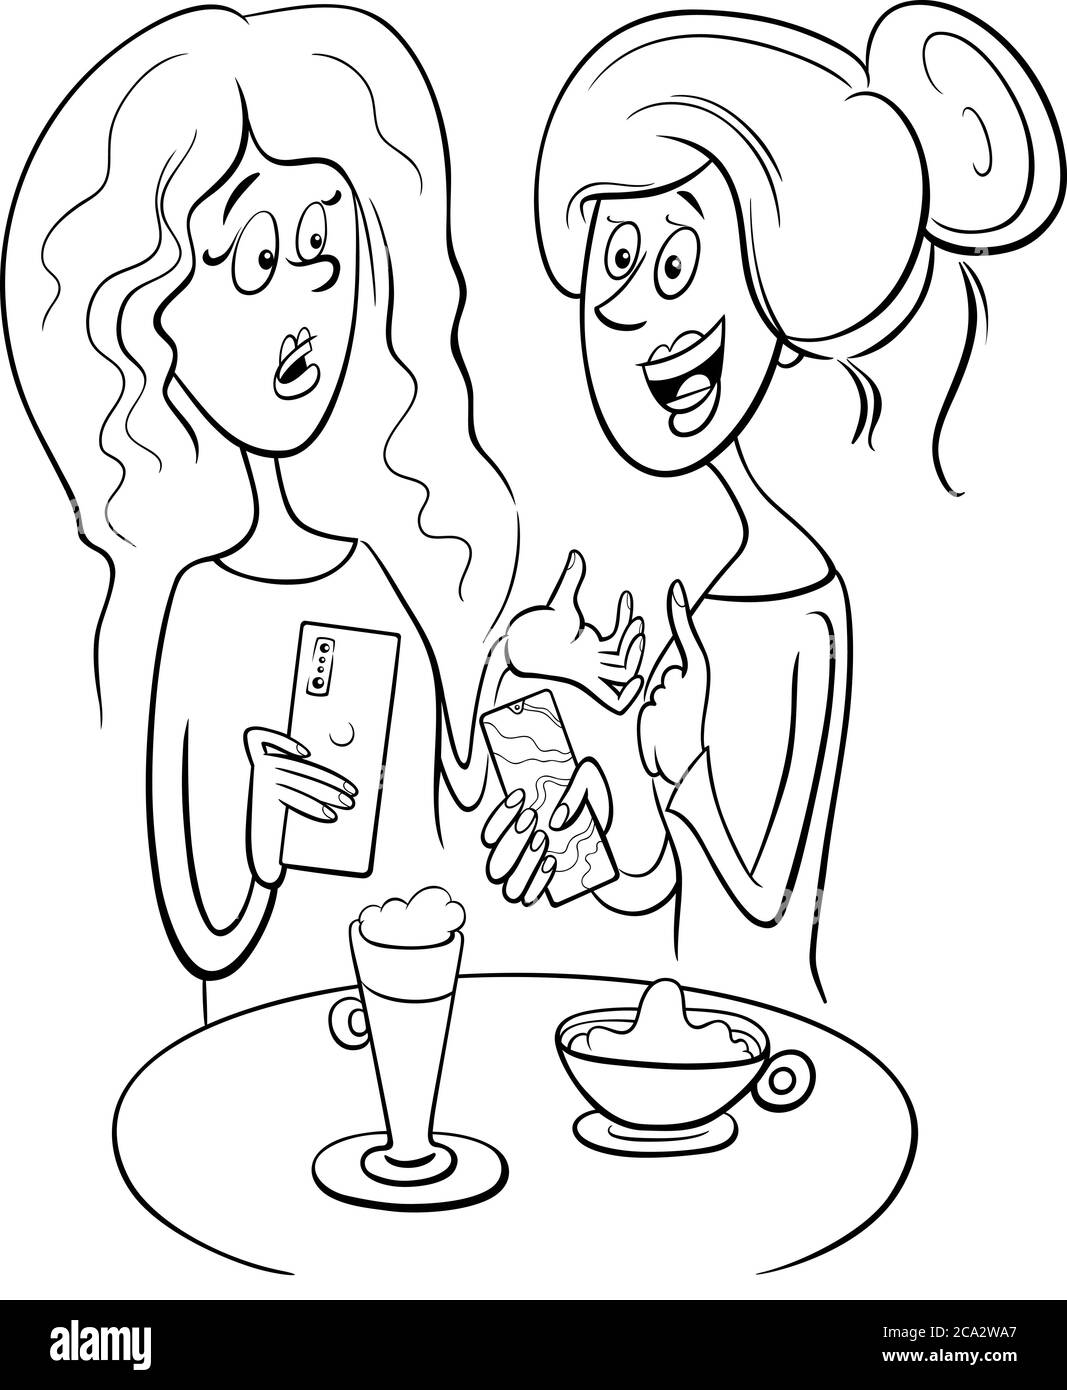 Black and White Cartoon Illustration of Two Gossiping Women in a Cafe Coloring Book Page Stock Vector